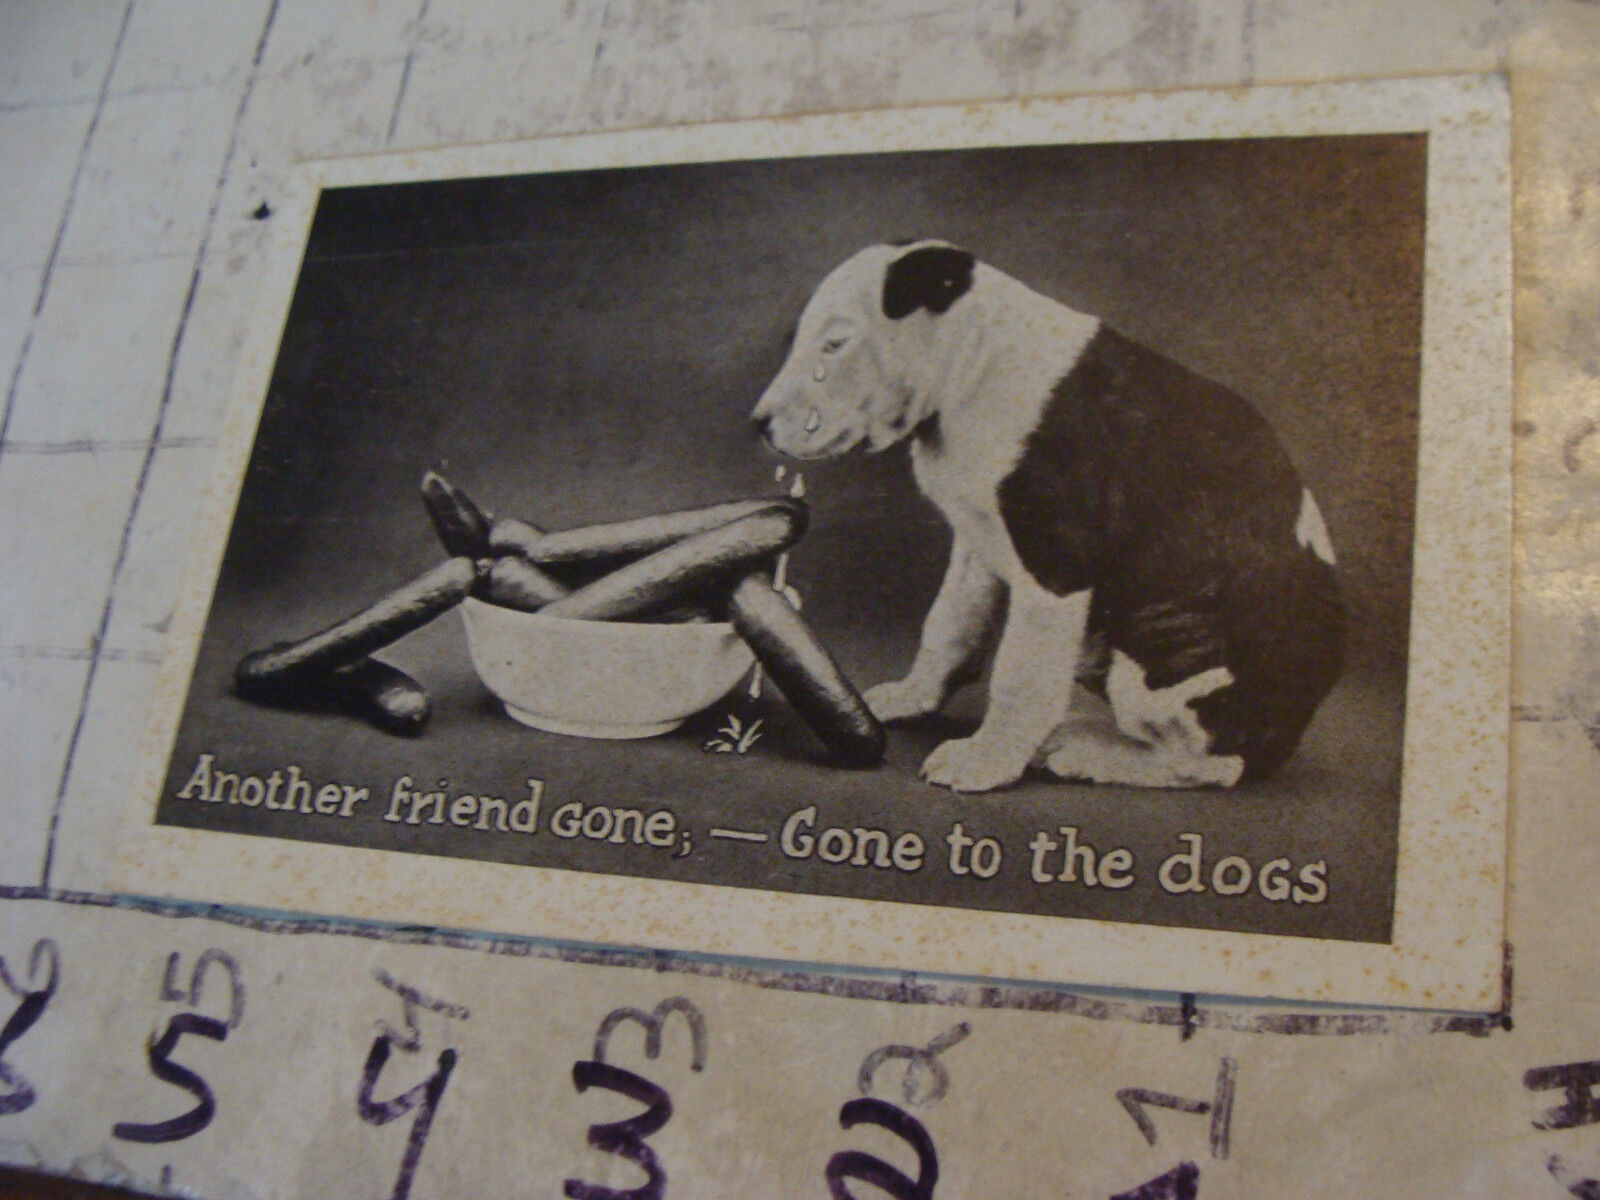 Orig Vint post card ANOTHER FRIEND GONE, GONE TO THE DOGS